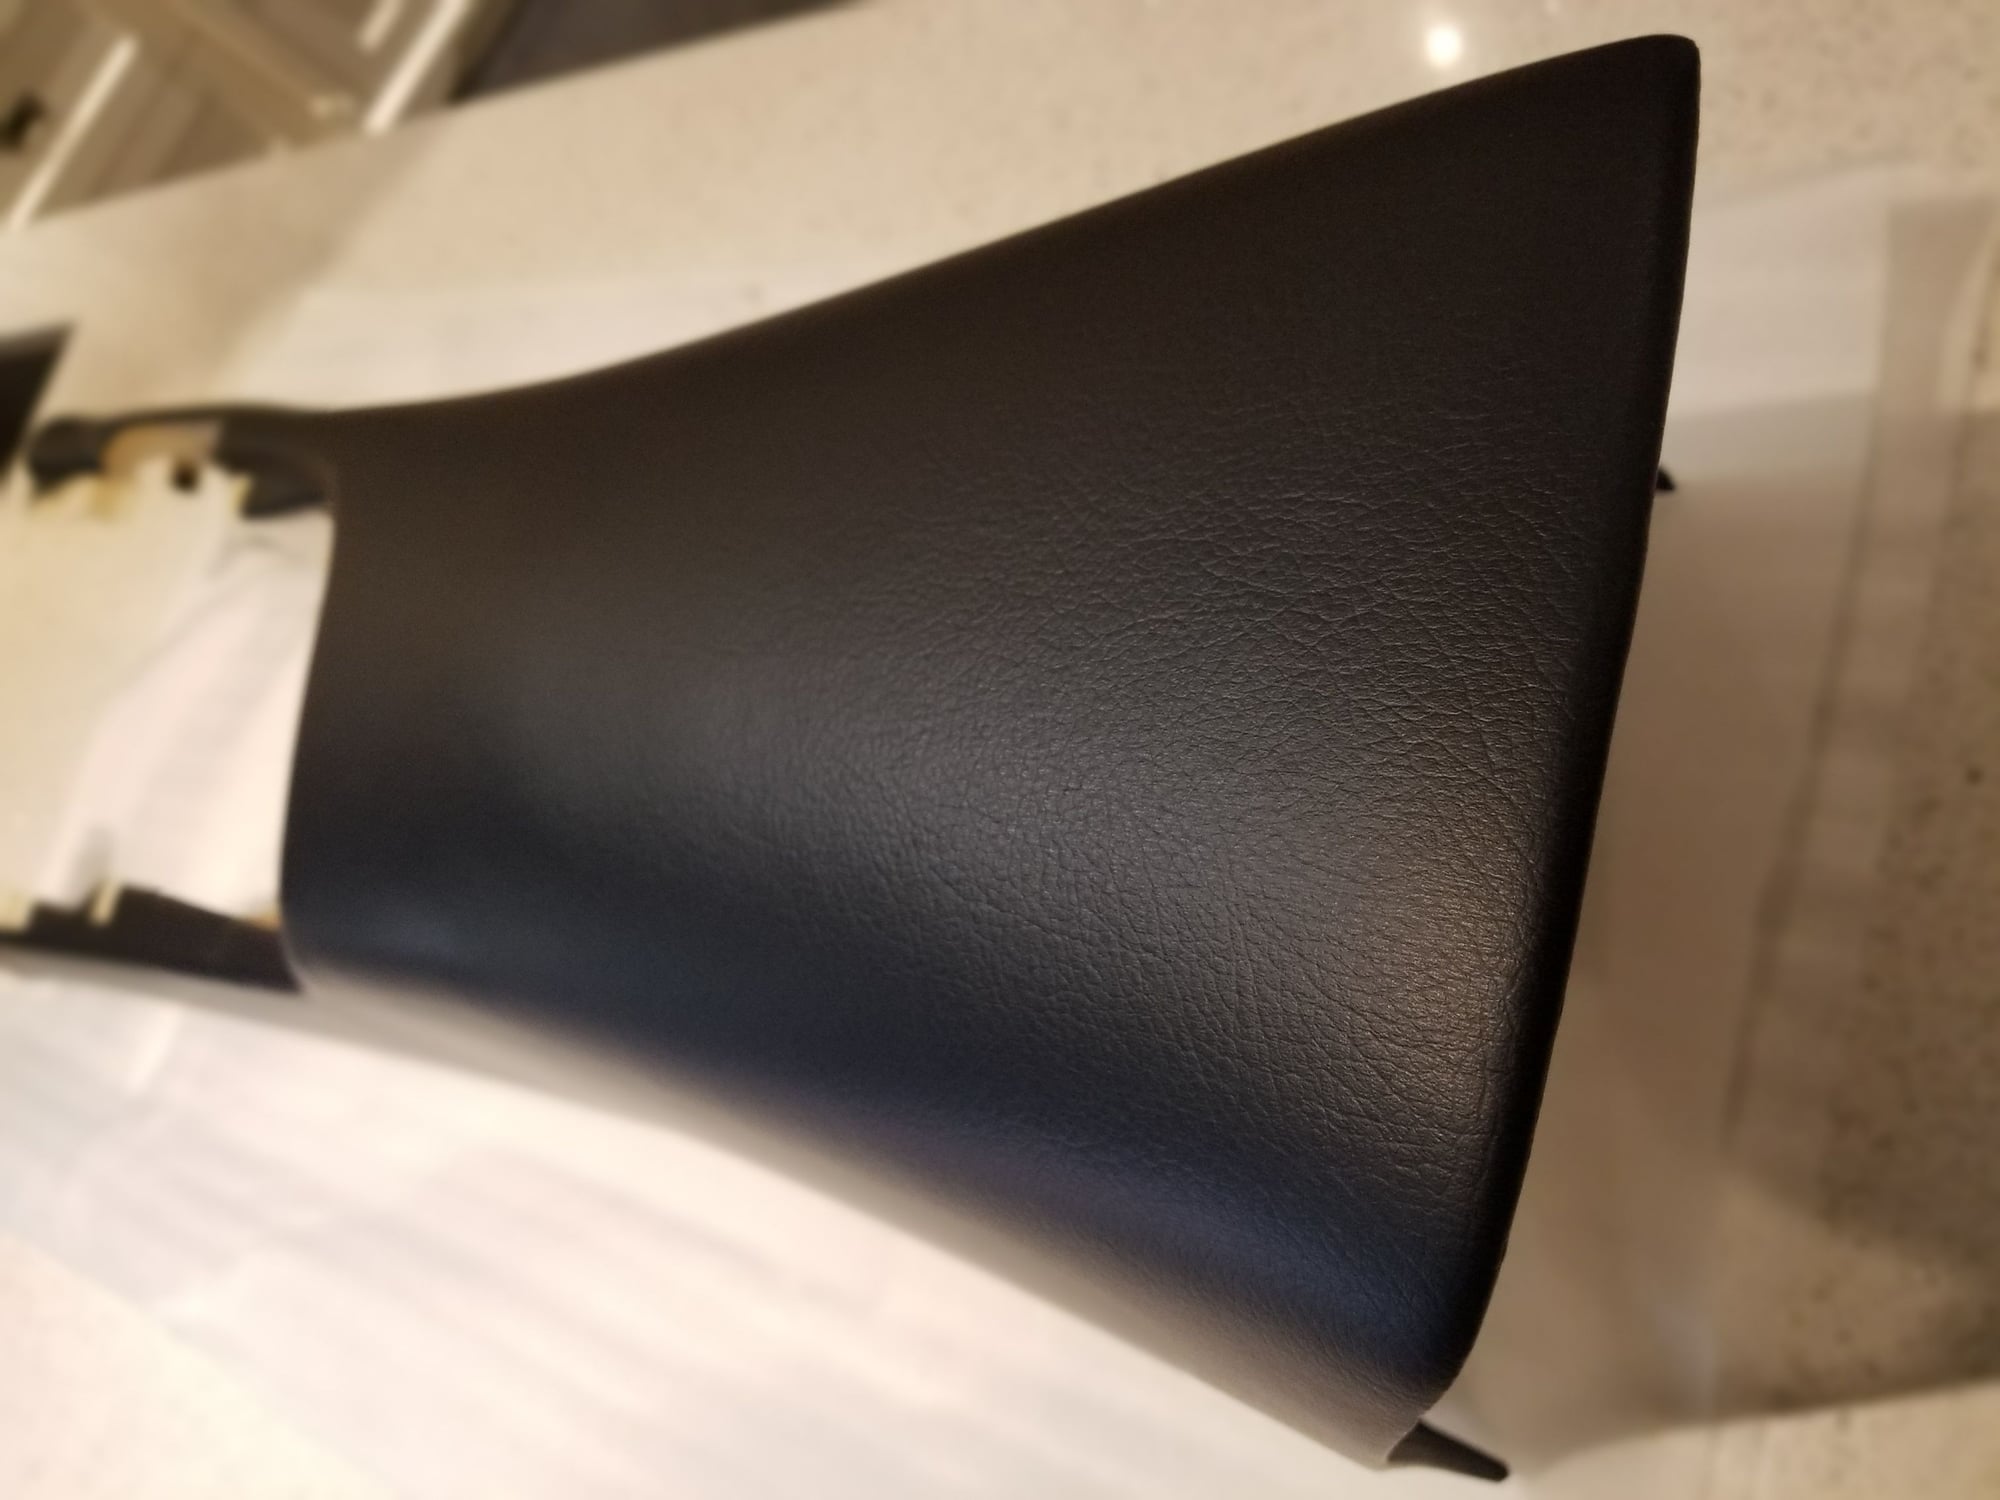 Interior/Upholstery - Brand New Super Rare FD3S Center Console Tunnel Cover Base (LHD) - New - 1993 to 1995 Mazda RX-7 - Toronto, ON M9A3G2, Canada